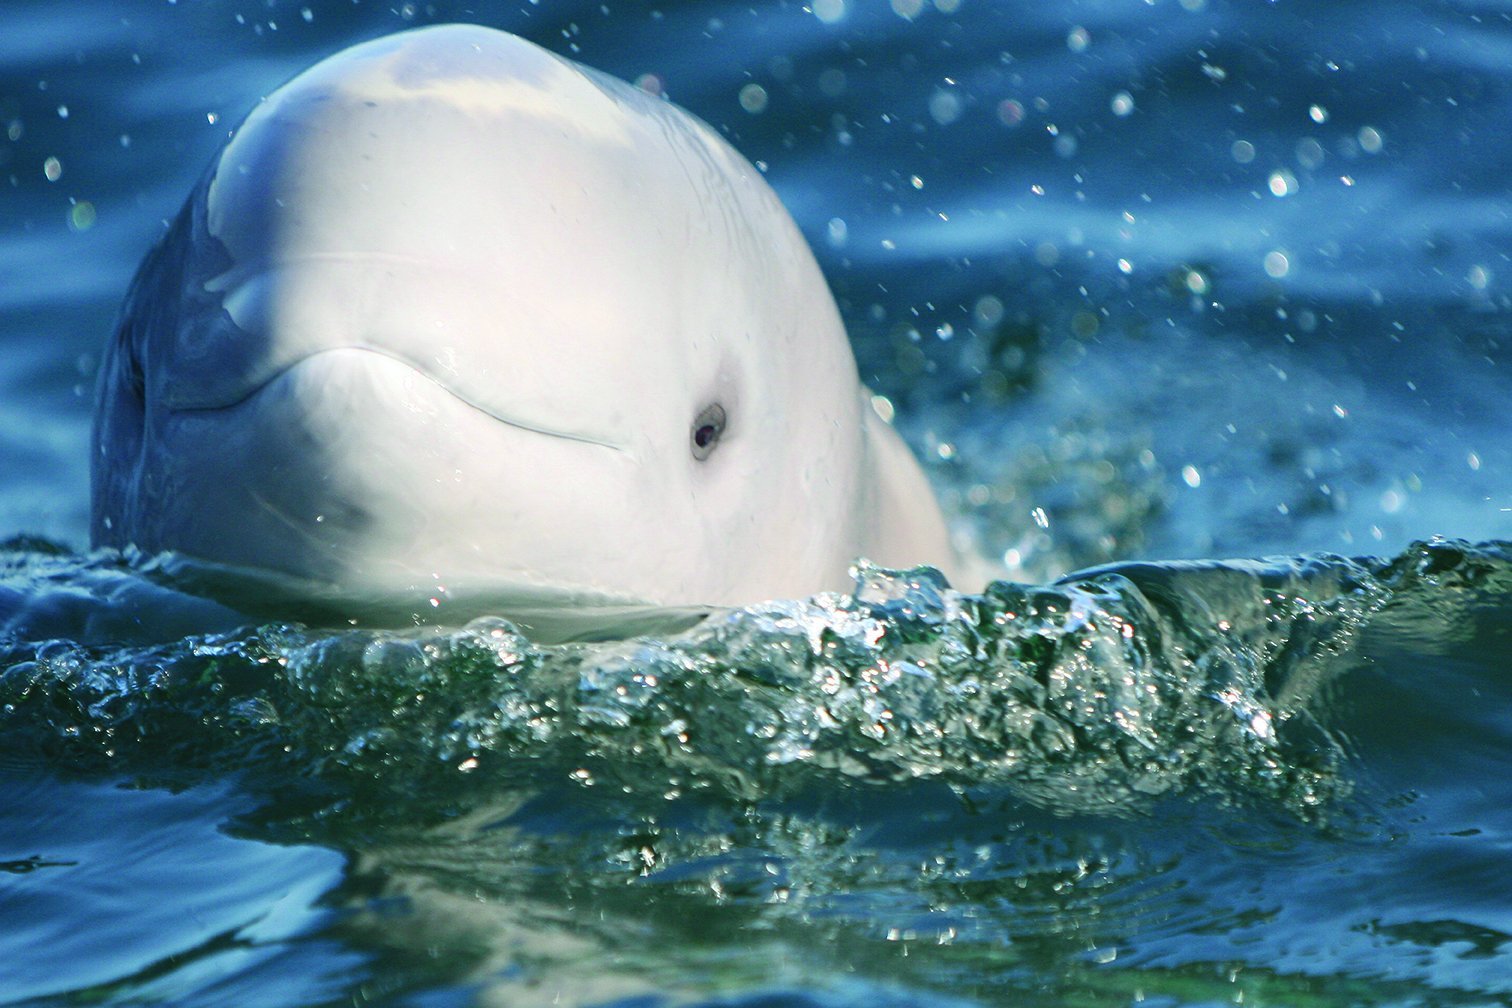 Saw many beluga whales in the distance. ( picture from google... )